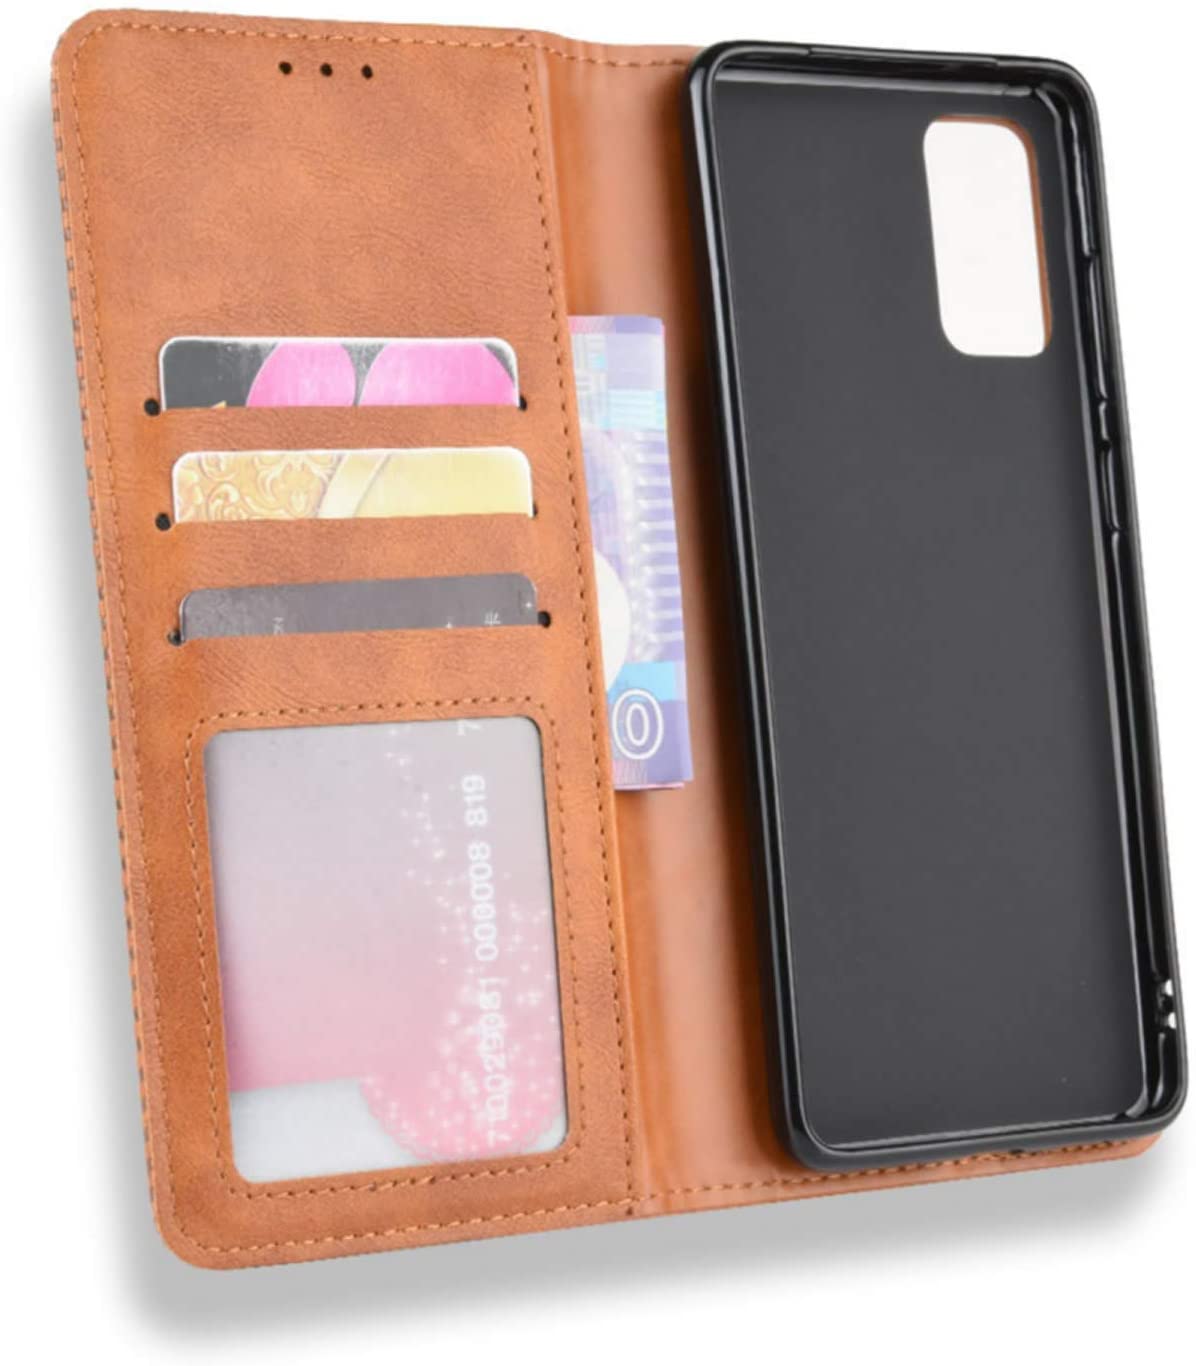 Samsung Galaxy S20 5G full body protection Leather Wallet flip case cover by Excelsior